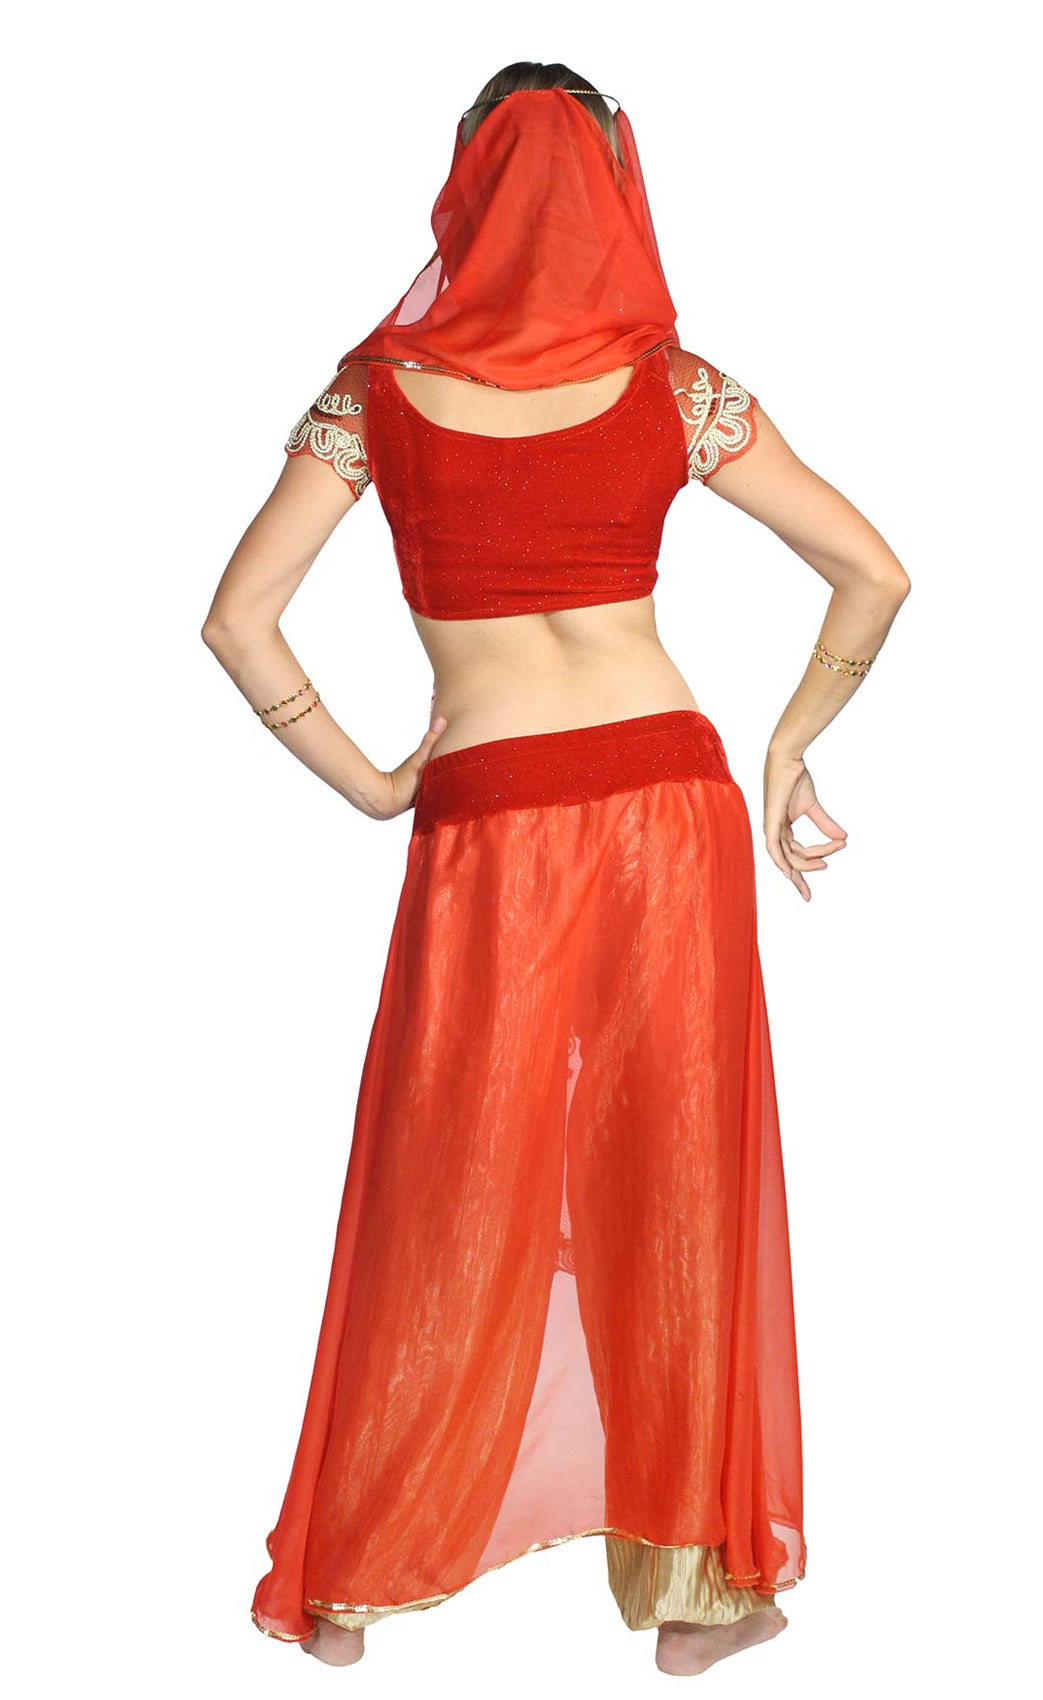 Different back view of Belly dancer costume in red with veil